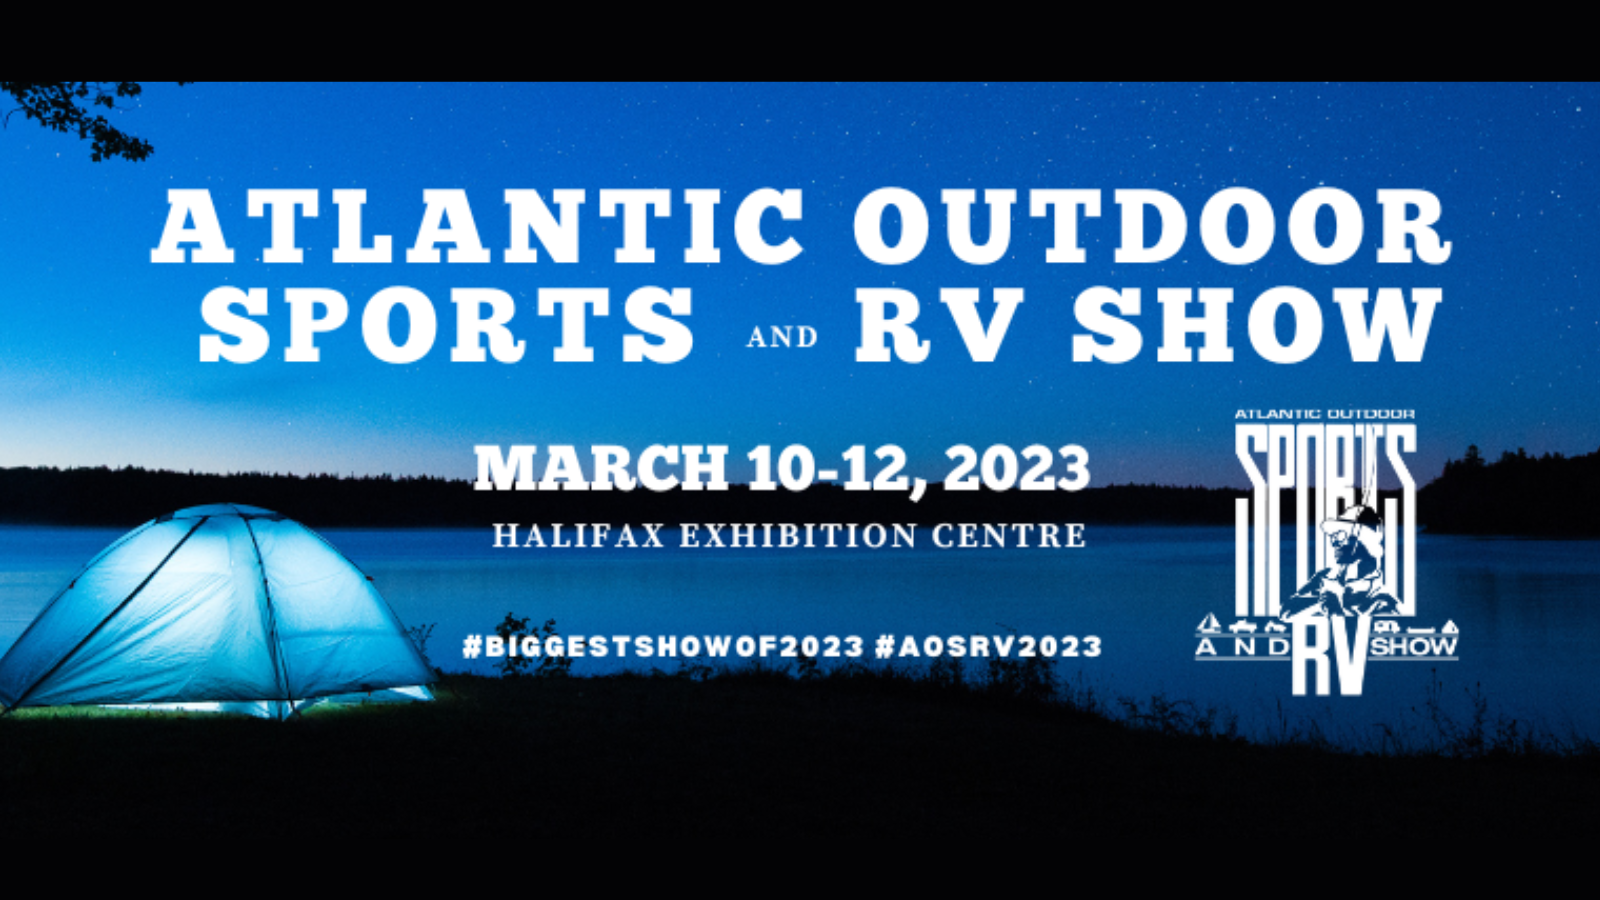 Atlantic Outdoor Sports and RV show feature image